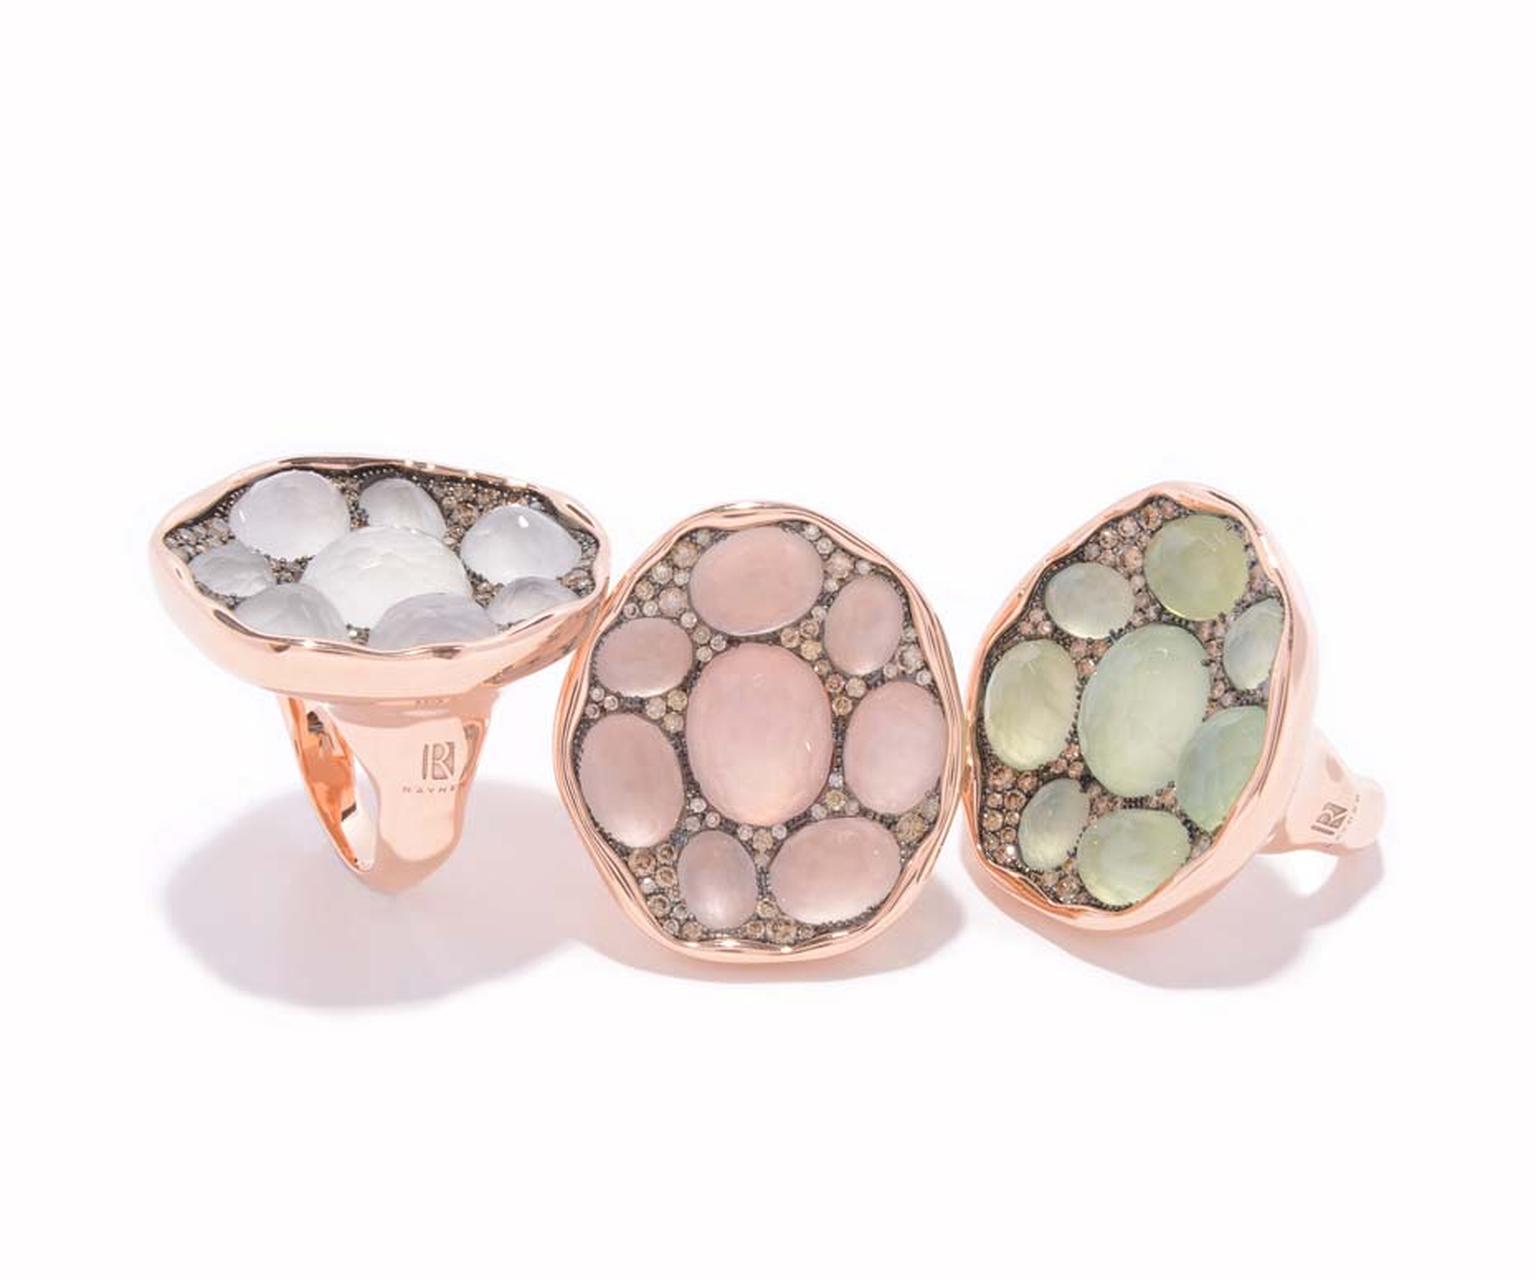 Rodney Rayner red gold rings featuring, from left to right, 8 white quartz, 8 rose quartz and 8 prehnites surrounded by a sprinkling of diamonds.